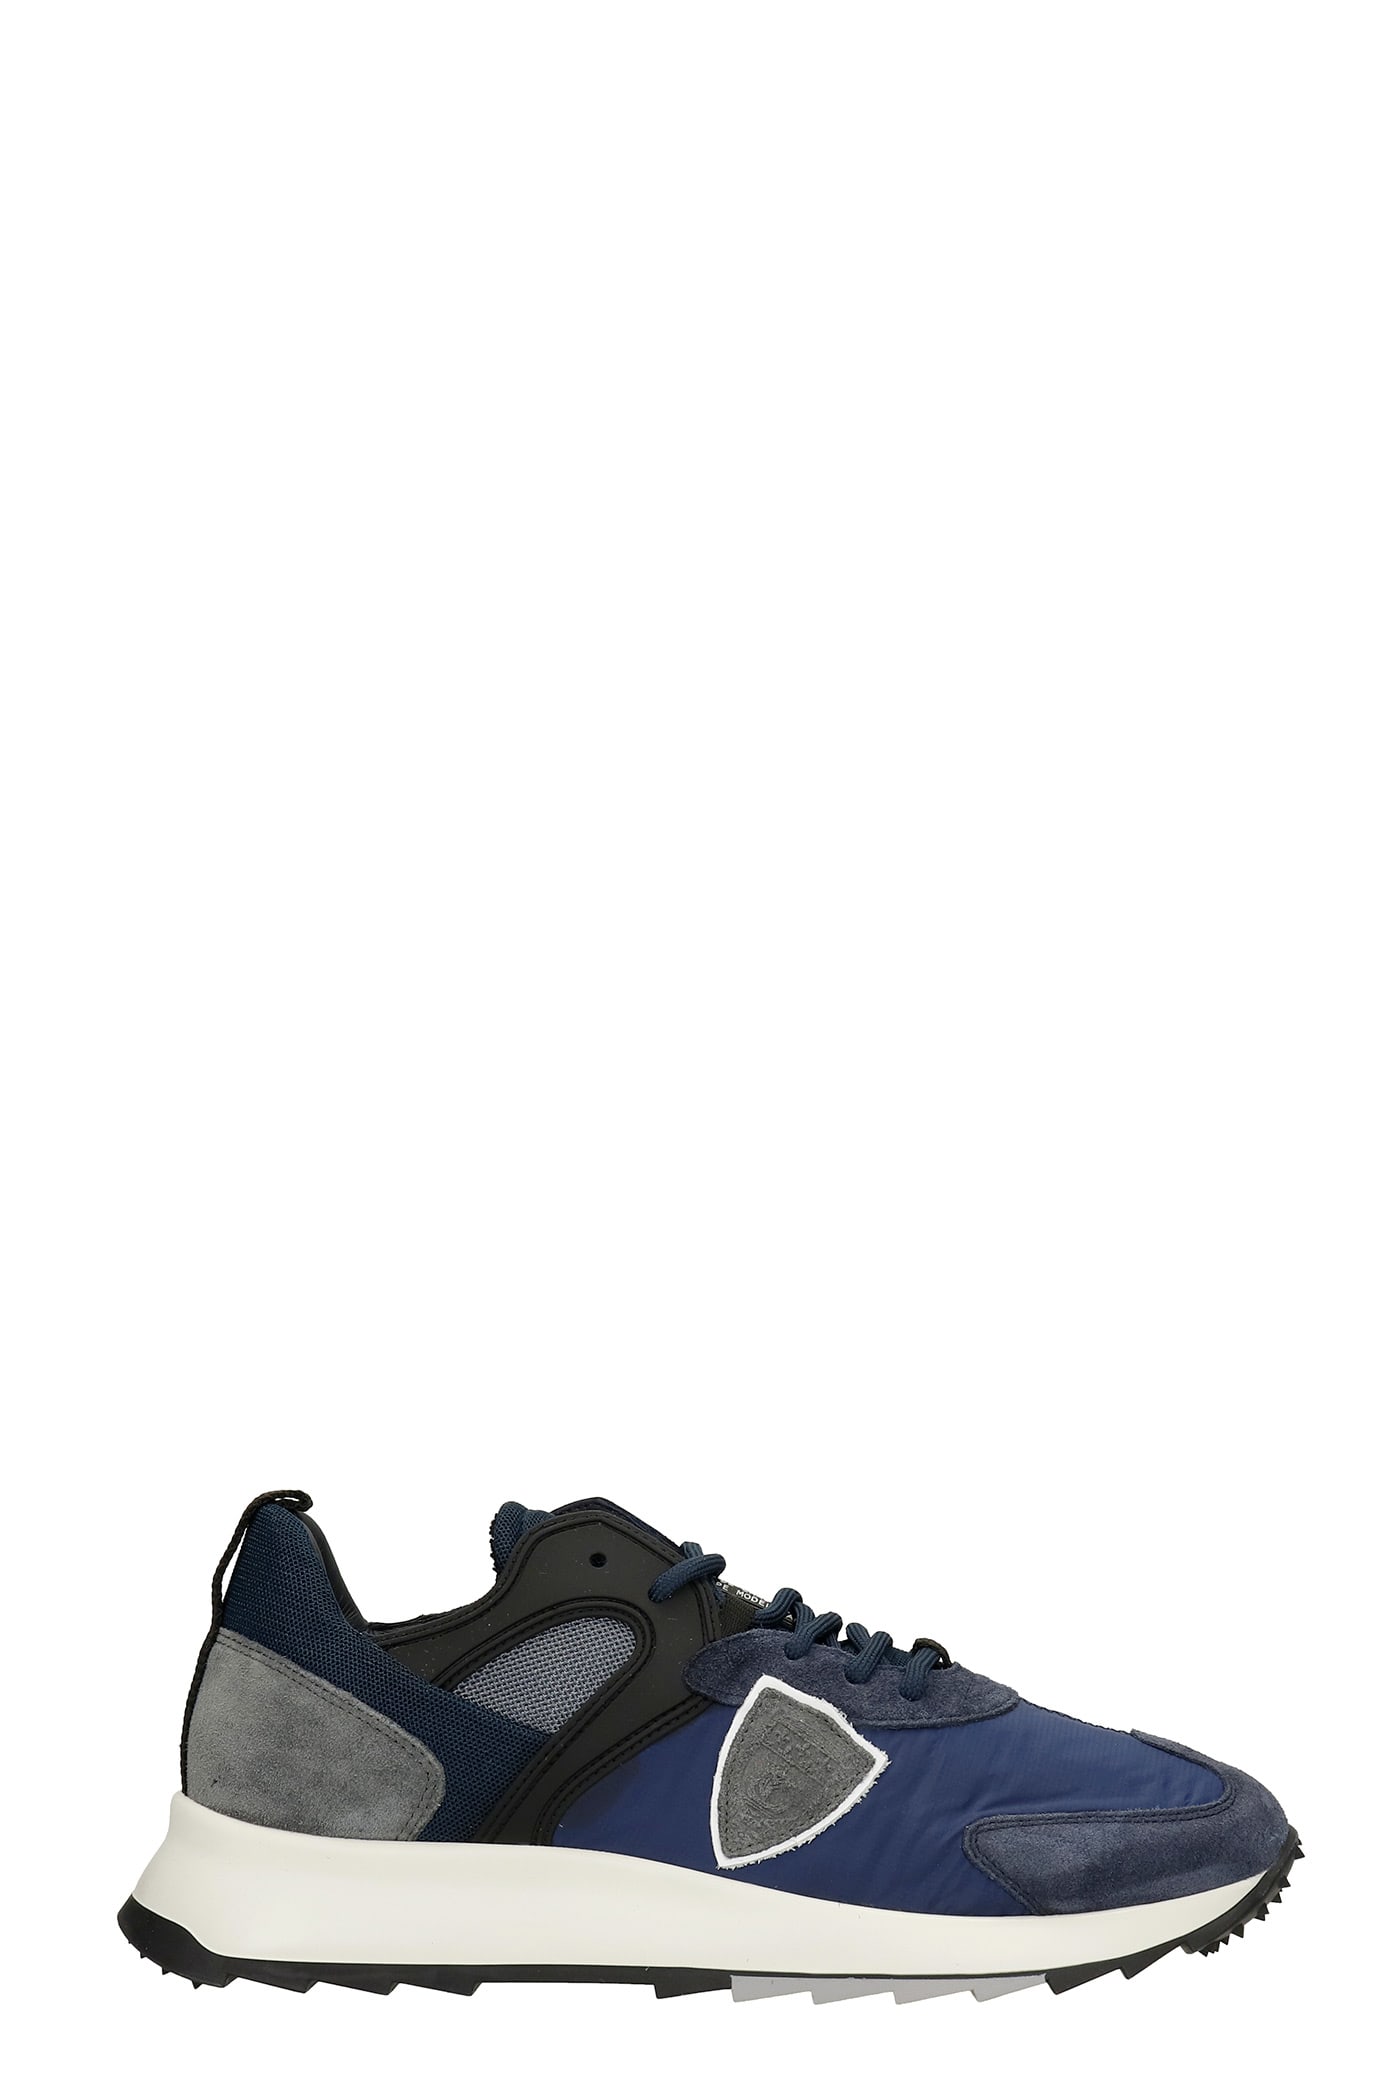 Philippe Model Royale Sneakers In Blue Synthetic Fibers